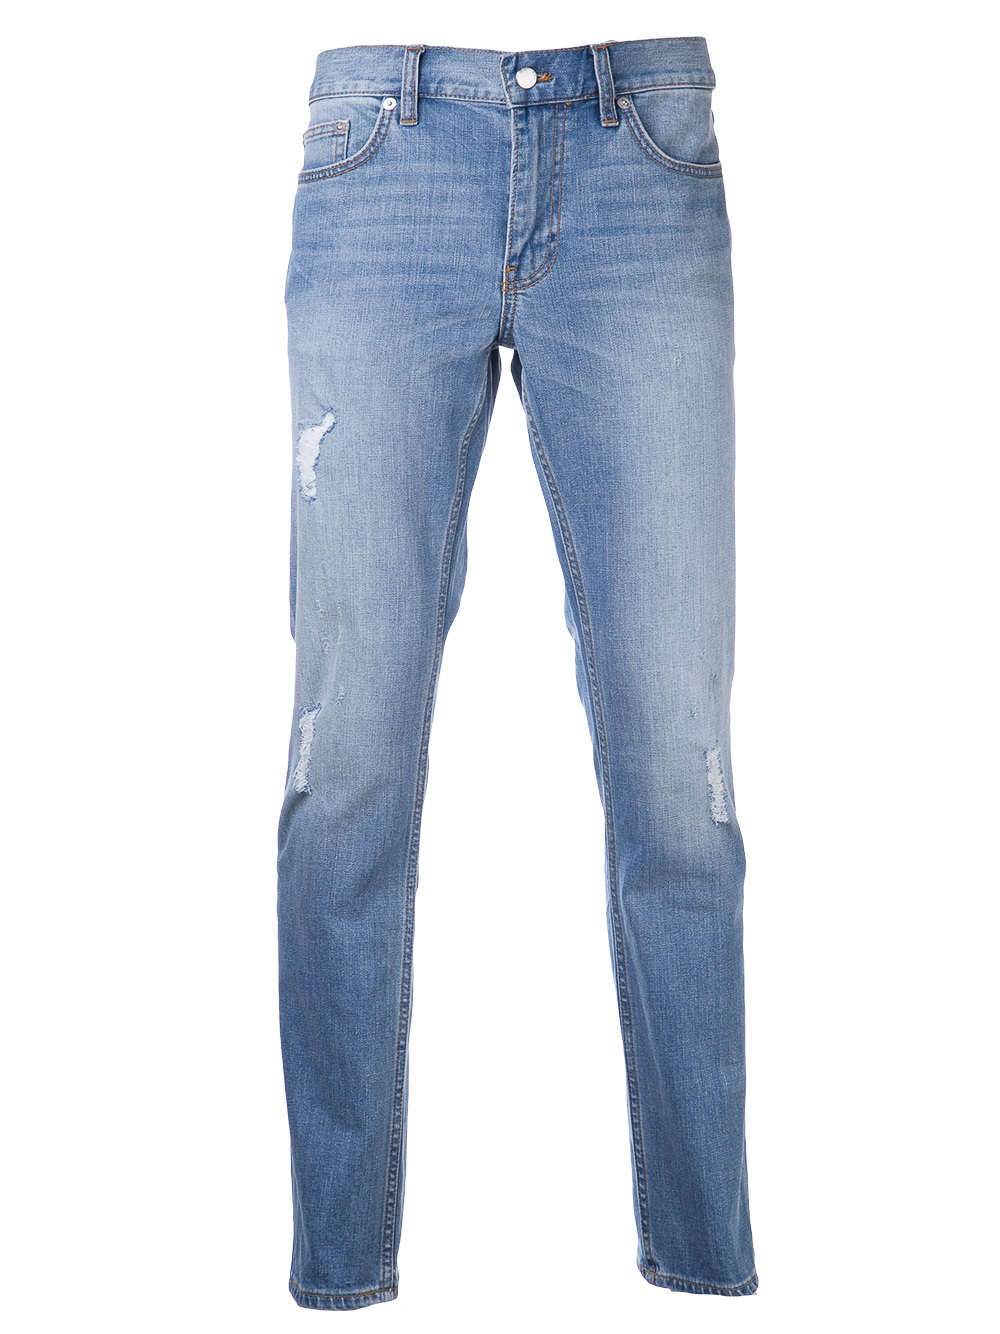 Lyst - Blk Dnm Faded Jeans in Blue for Men